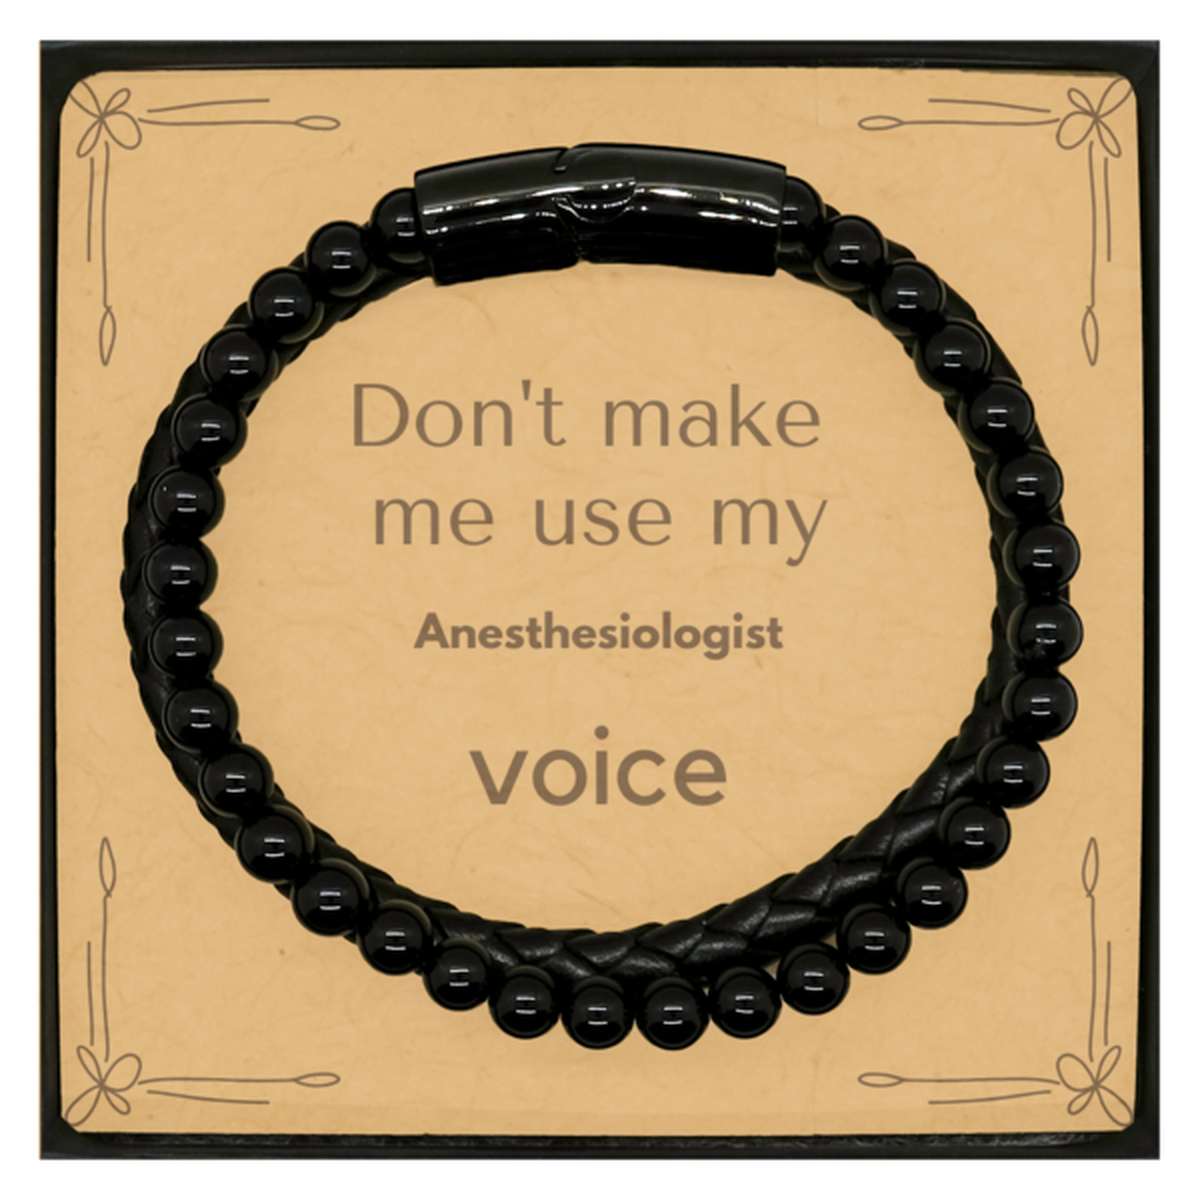 Don't make me use my Anesthesiologist voice, Sarcasm Anesthesiologist Card Gifts, Christmas Anesthesiologist Stone Leather Bracelets Birthday Unique Gifts For Anesthesiologist Coworkers, Men, Women, Colleague, Friends